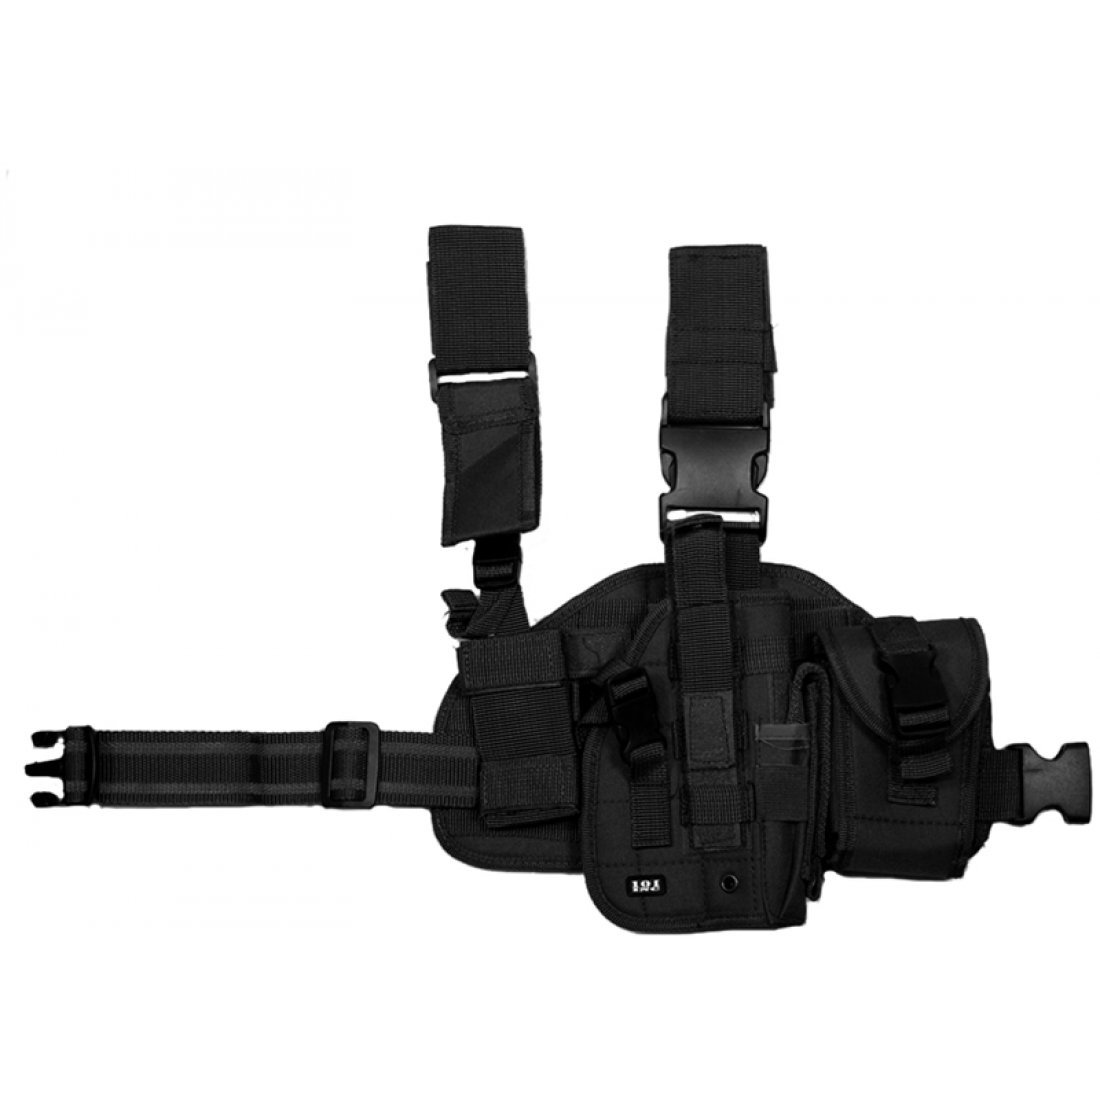 Buy 101-inc Hip Molle Leg Holster Right | Outdoor & Military